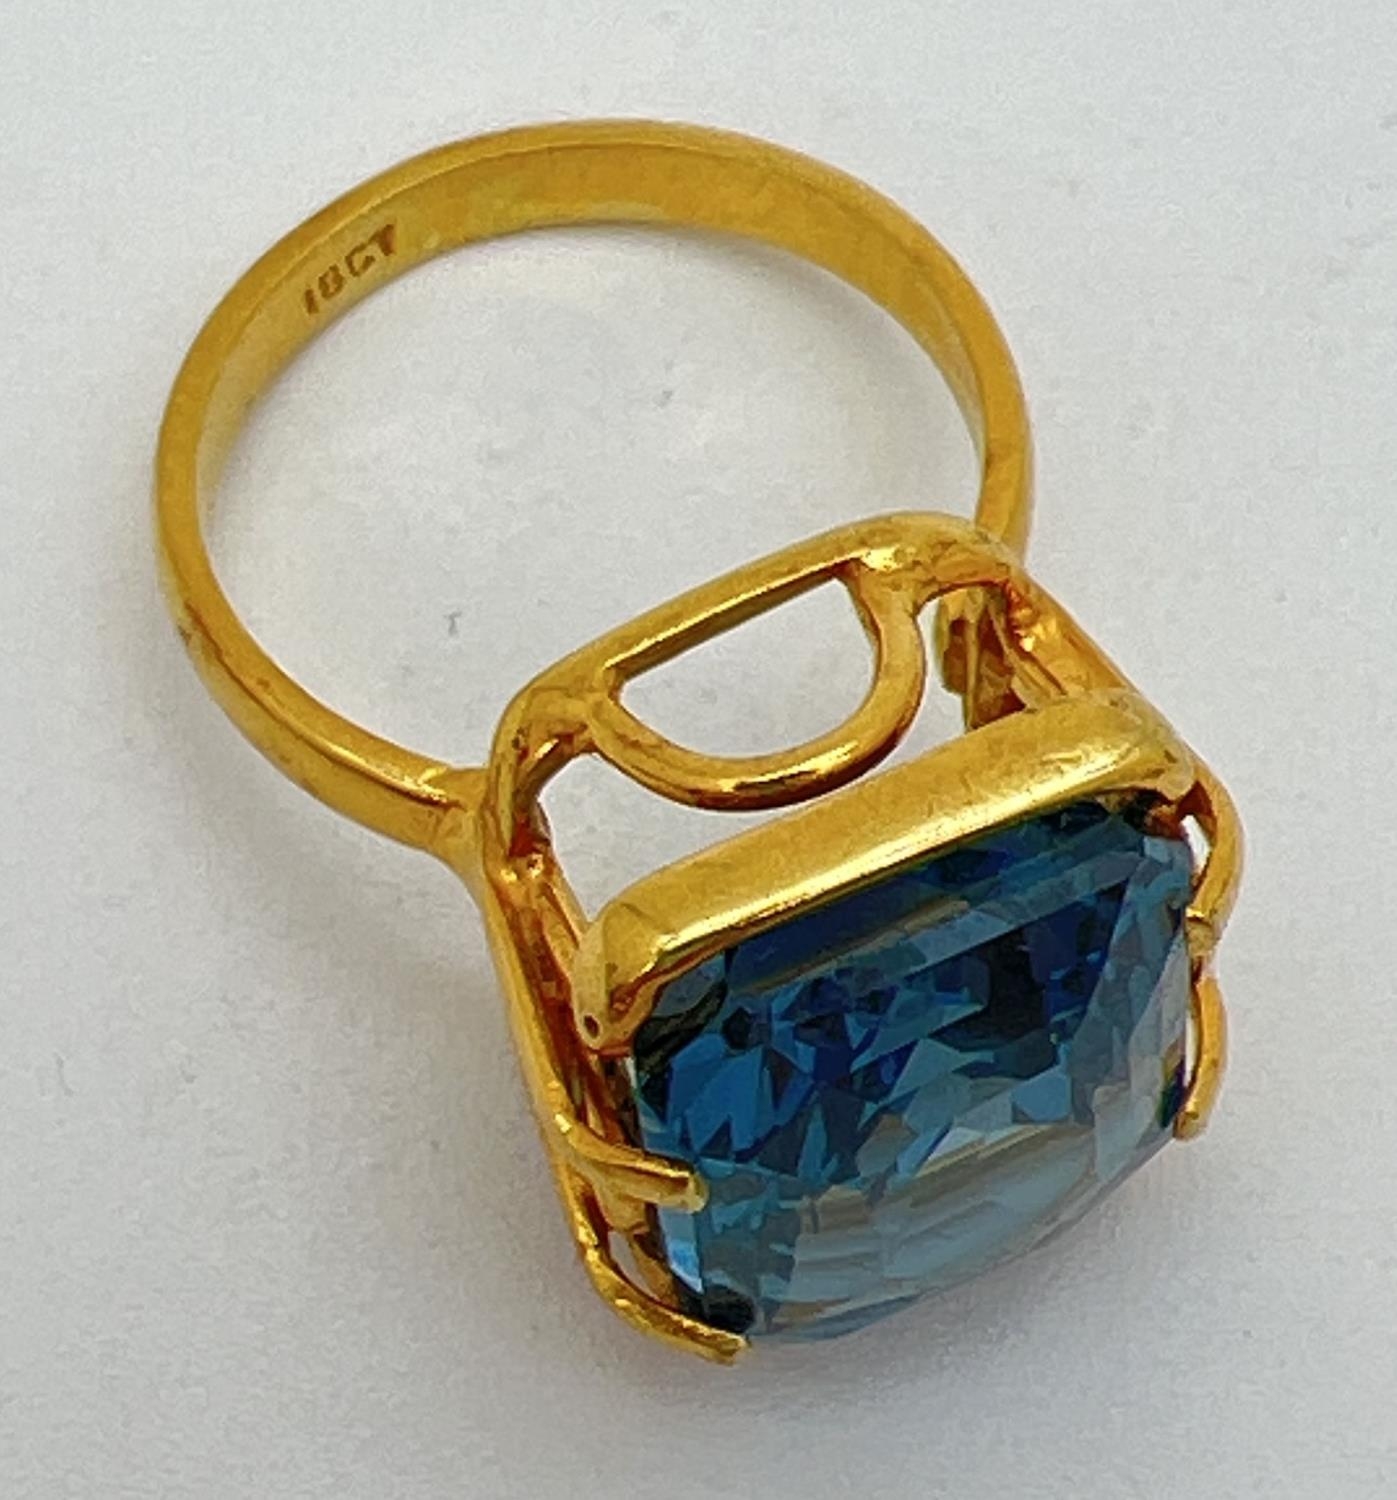 An 18k gold cocktail ring set with a large emerald cut Swiss blue topaz stone. Claw setting with - Image 4 of 4